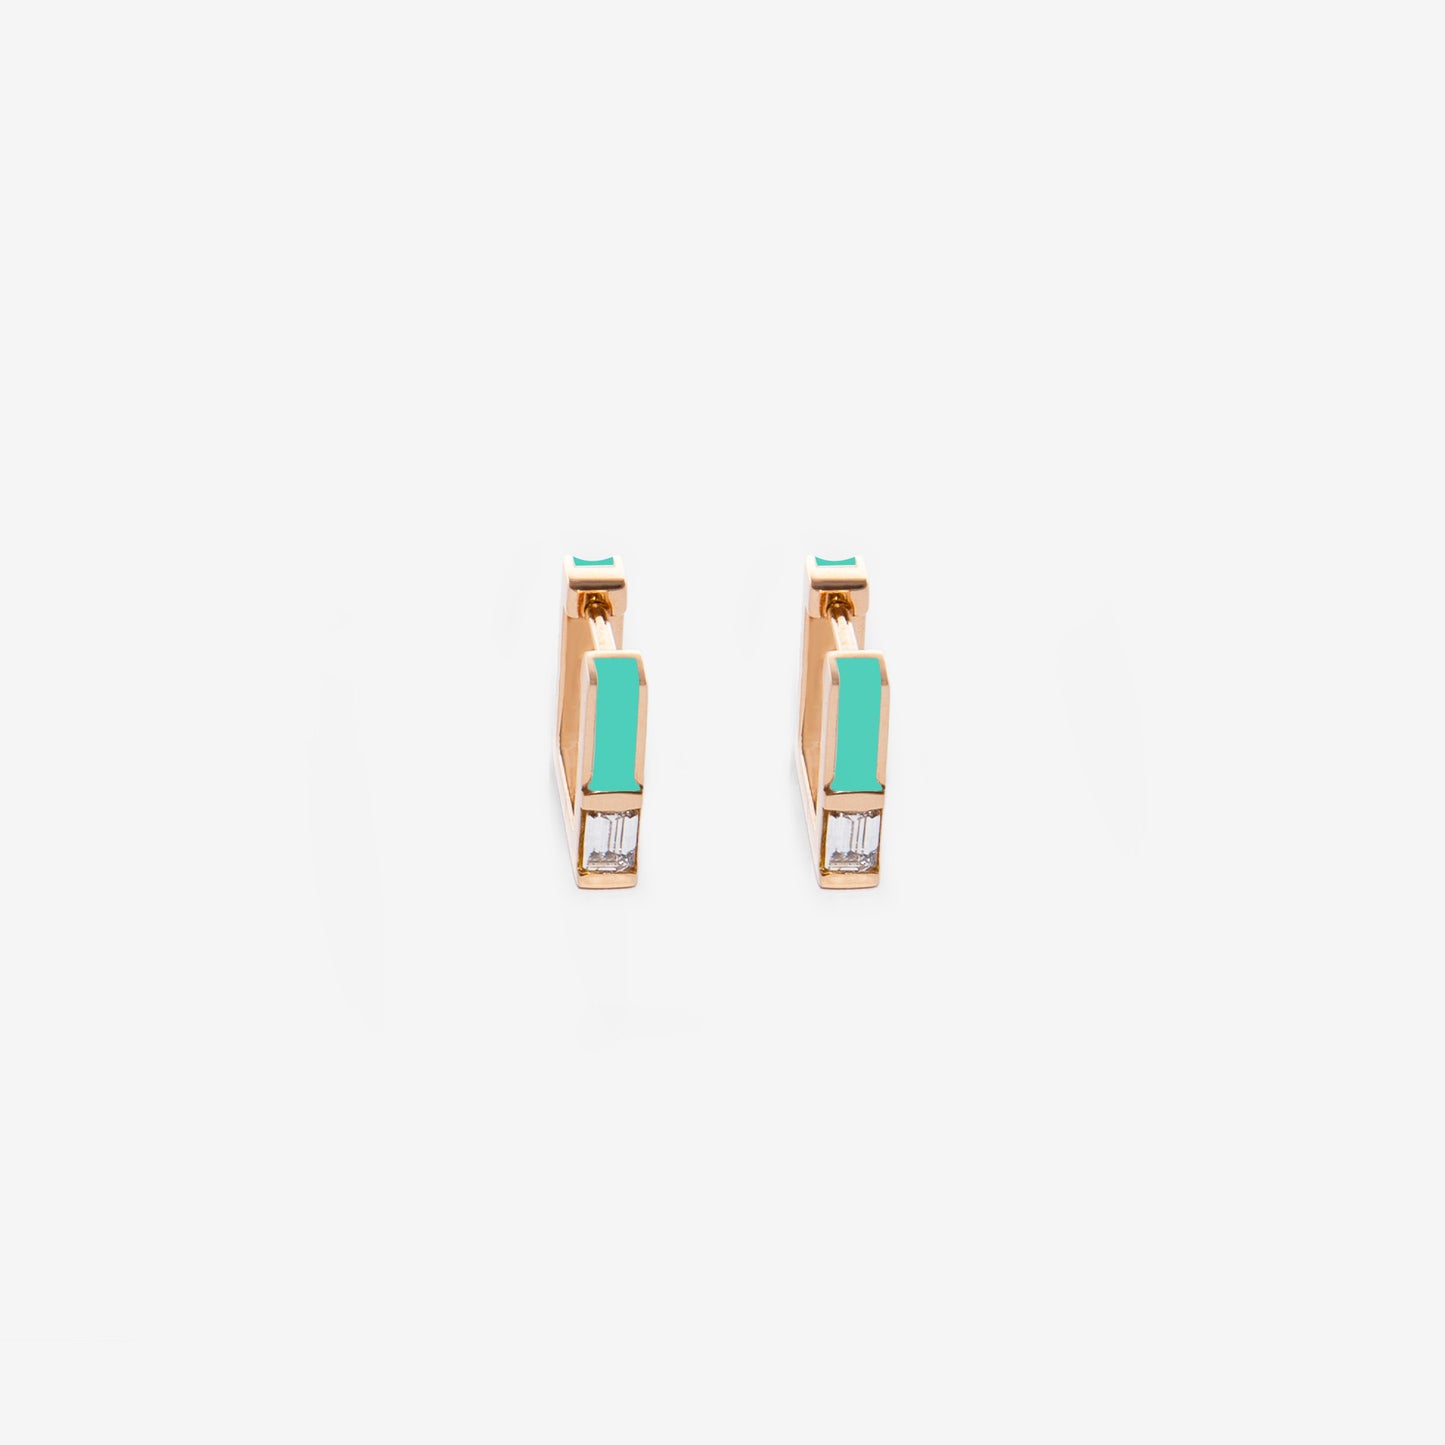 Square turquoise earrings with diamonds